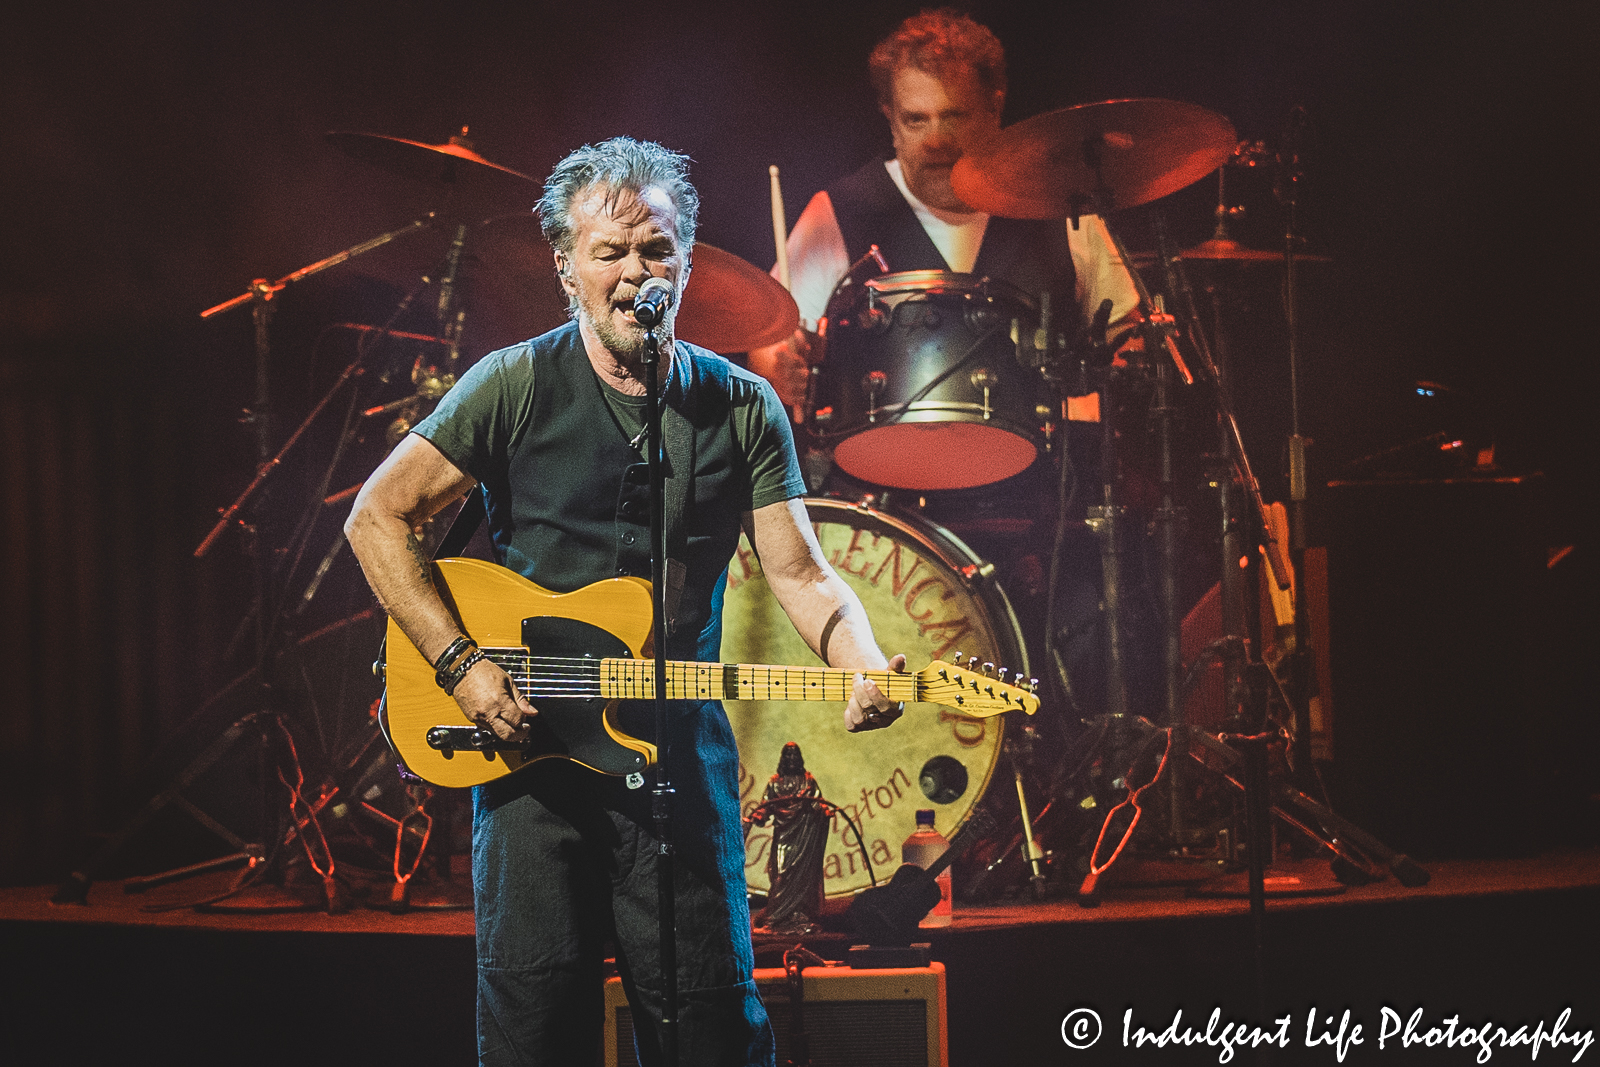 John Mellencamp performing "Paper in Fire" with drummer Dane Clark at The Midland Theatre in downtown Kansas City, MO on April 4, 2023.